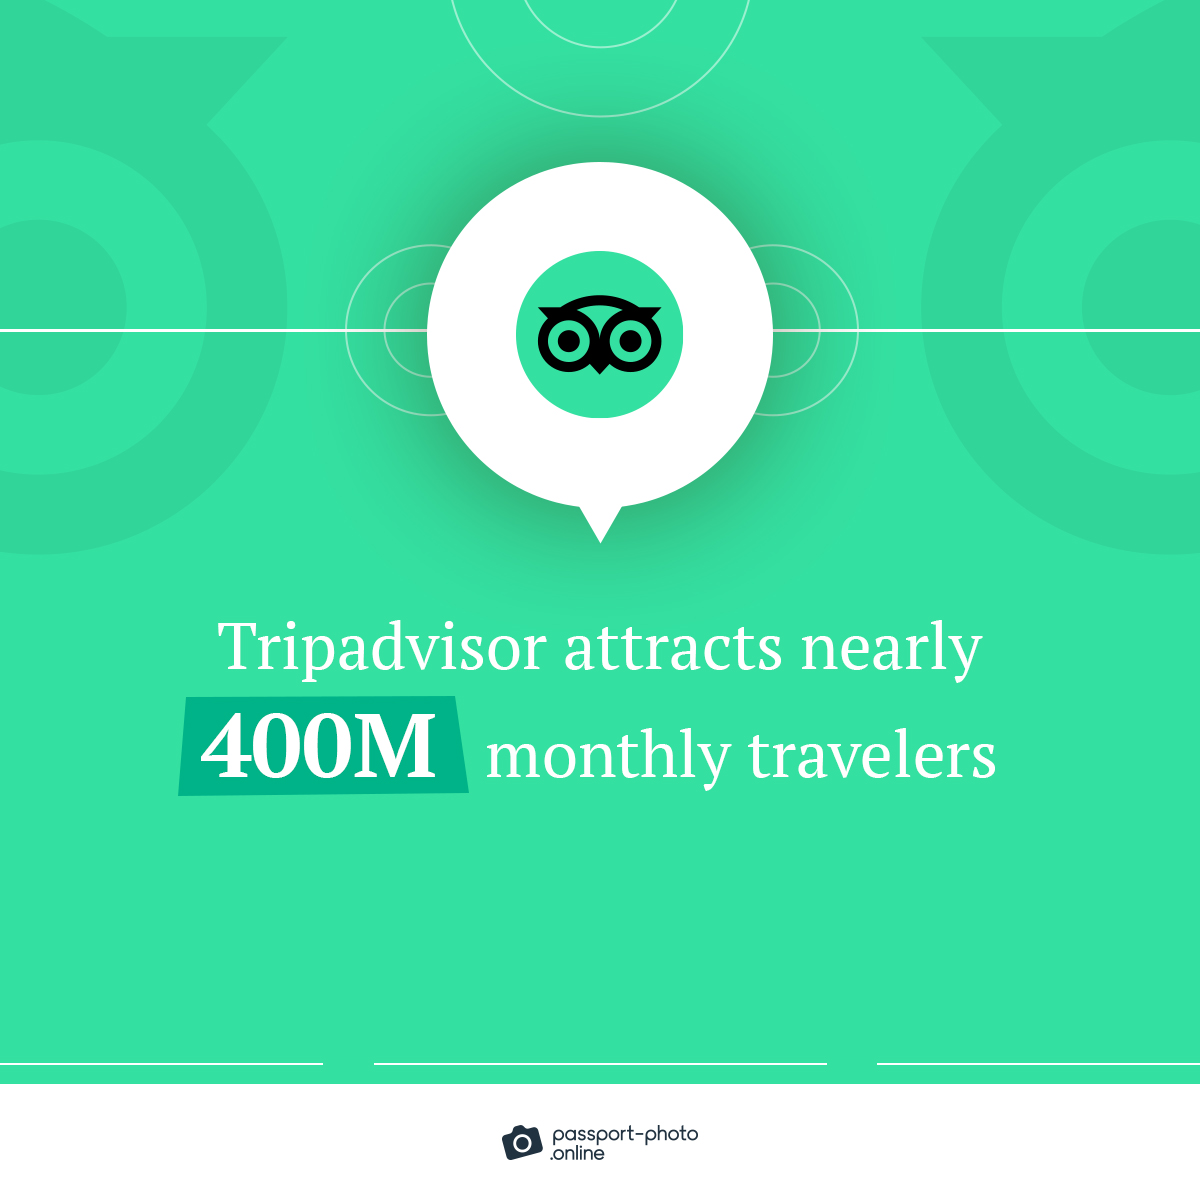 Tripadvisor attracts nearly 400M monthly travelers